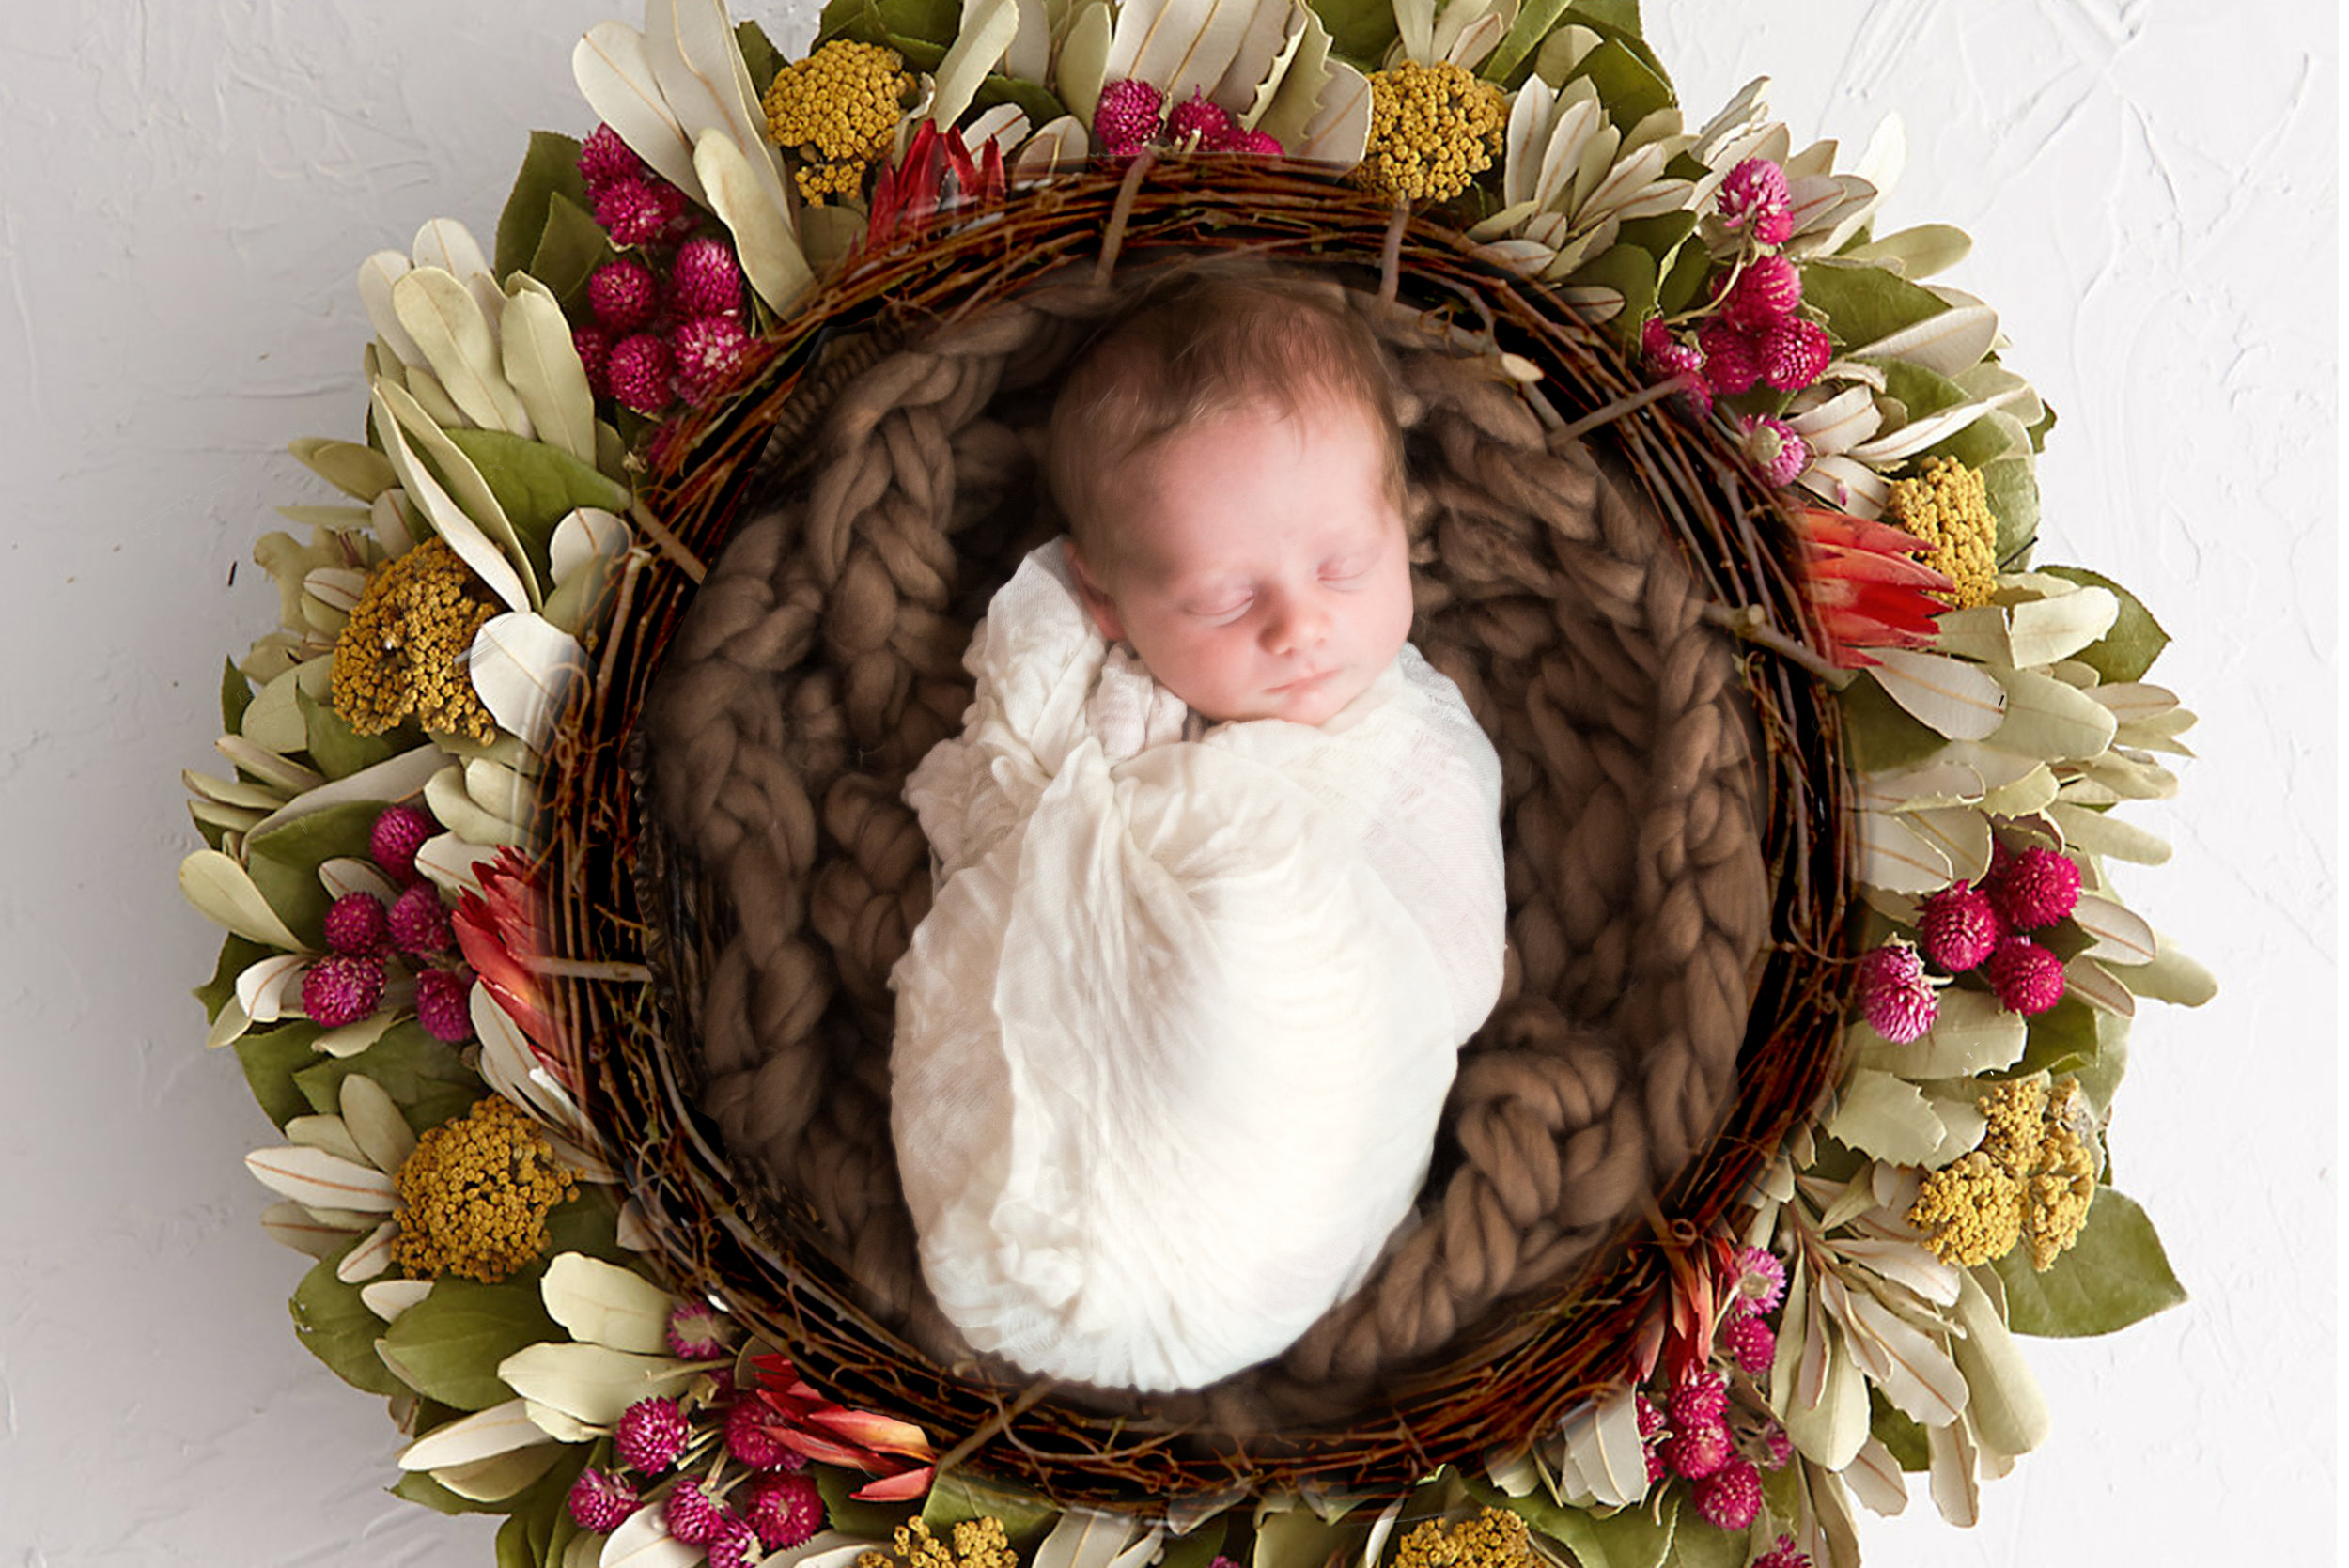  � adriennejeanne.com

MA Portrait & Wedding Photographer Adrienne Jeanne Photography. Photography studio specializing in weddings, newborn and family and commercial portraiture. Available for creative photography throughout New England and Boston. adriennejeanne,com 